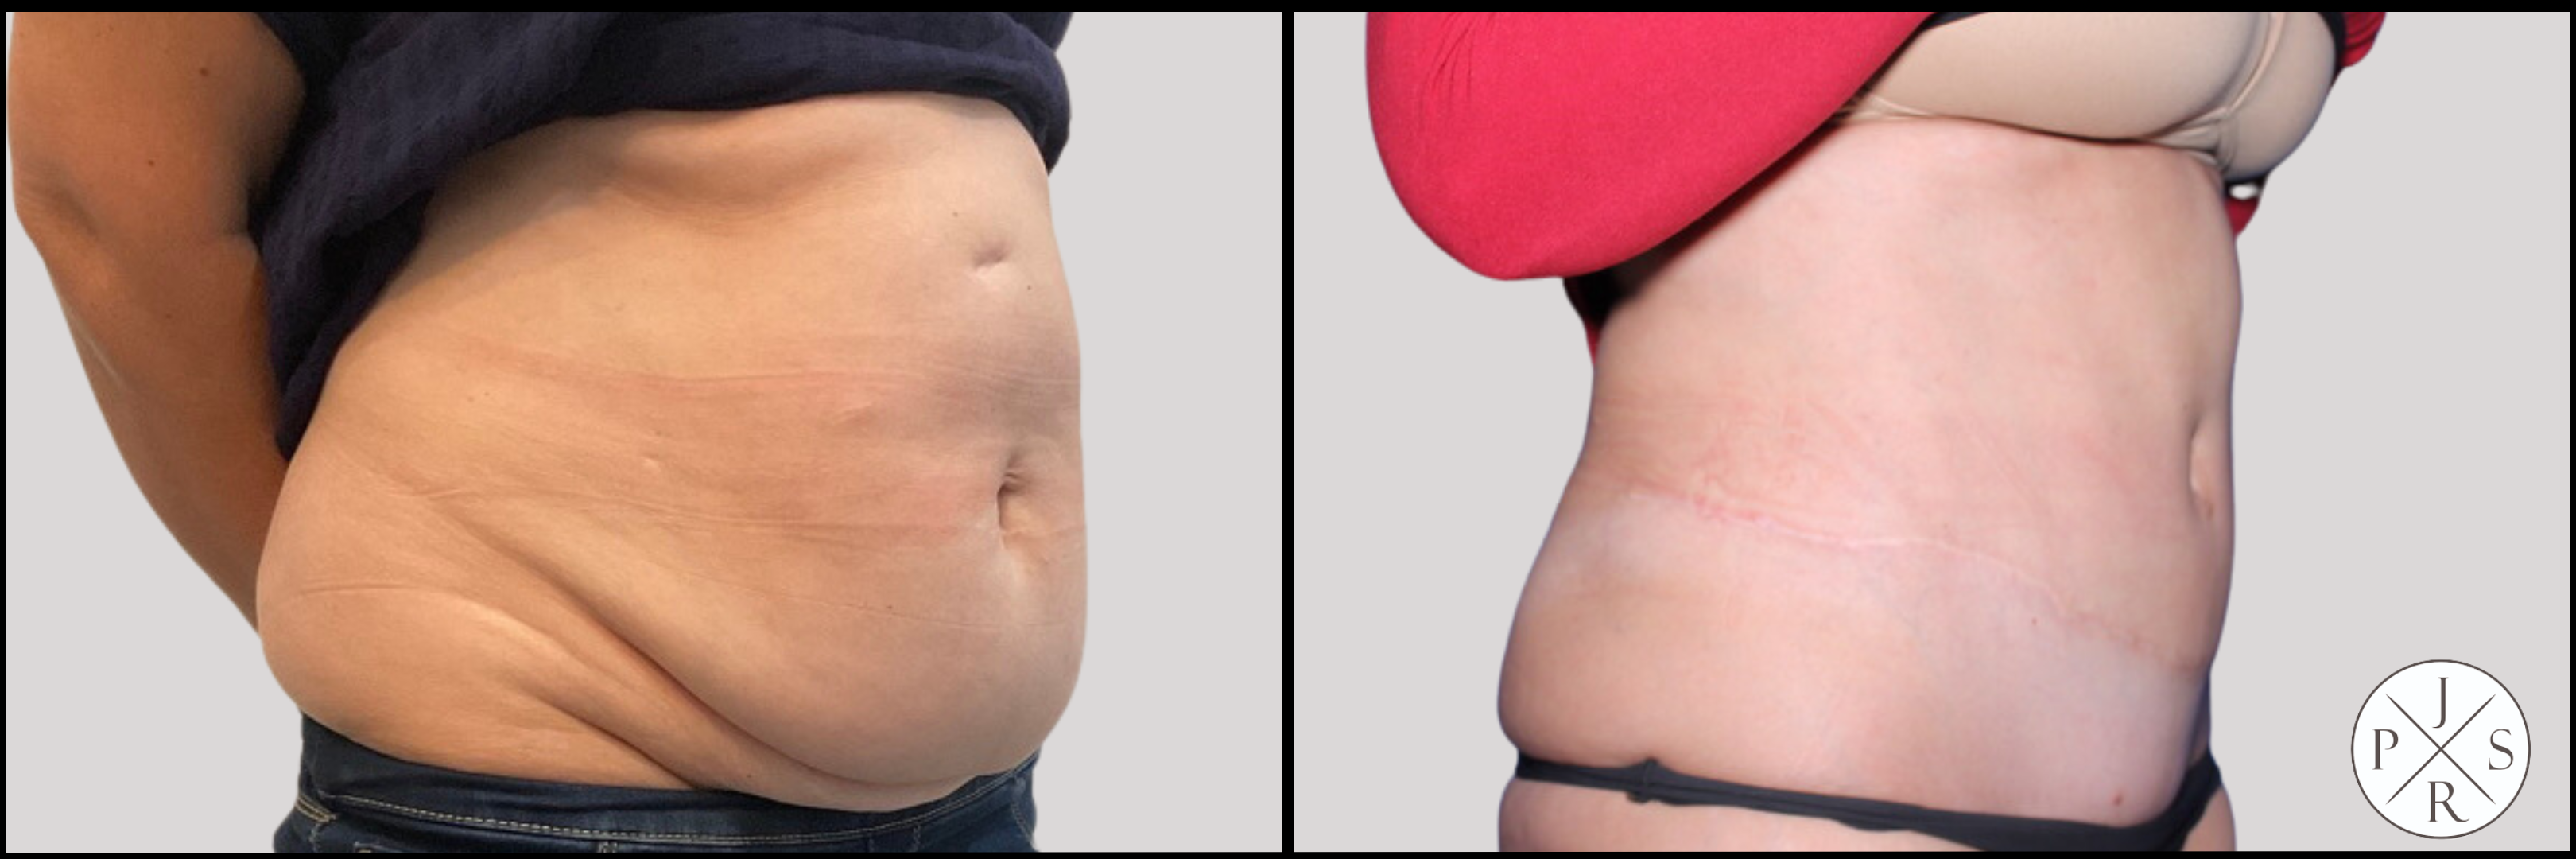 Lipoabdominoplasty – Before & After – Case 70250 - Dr. Marco Romeo